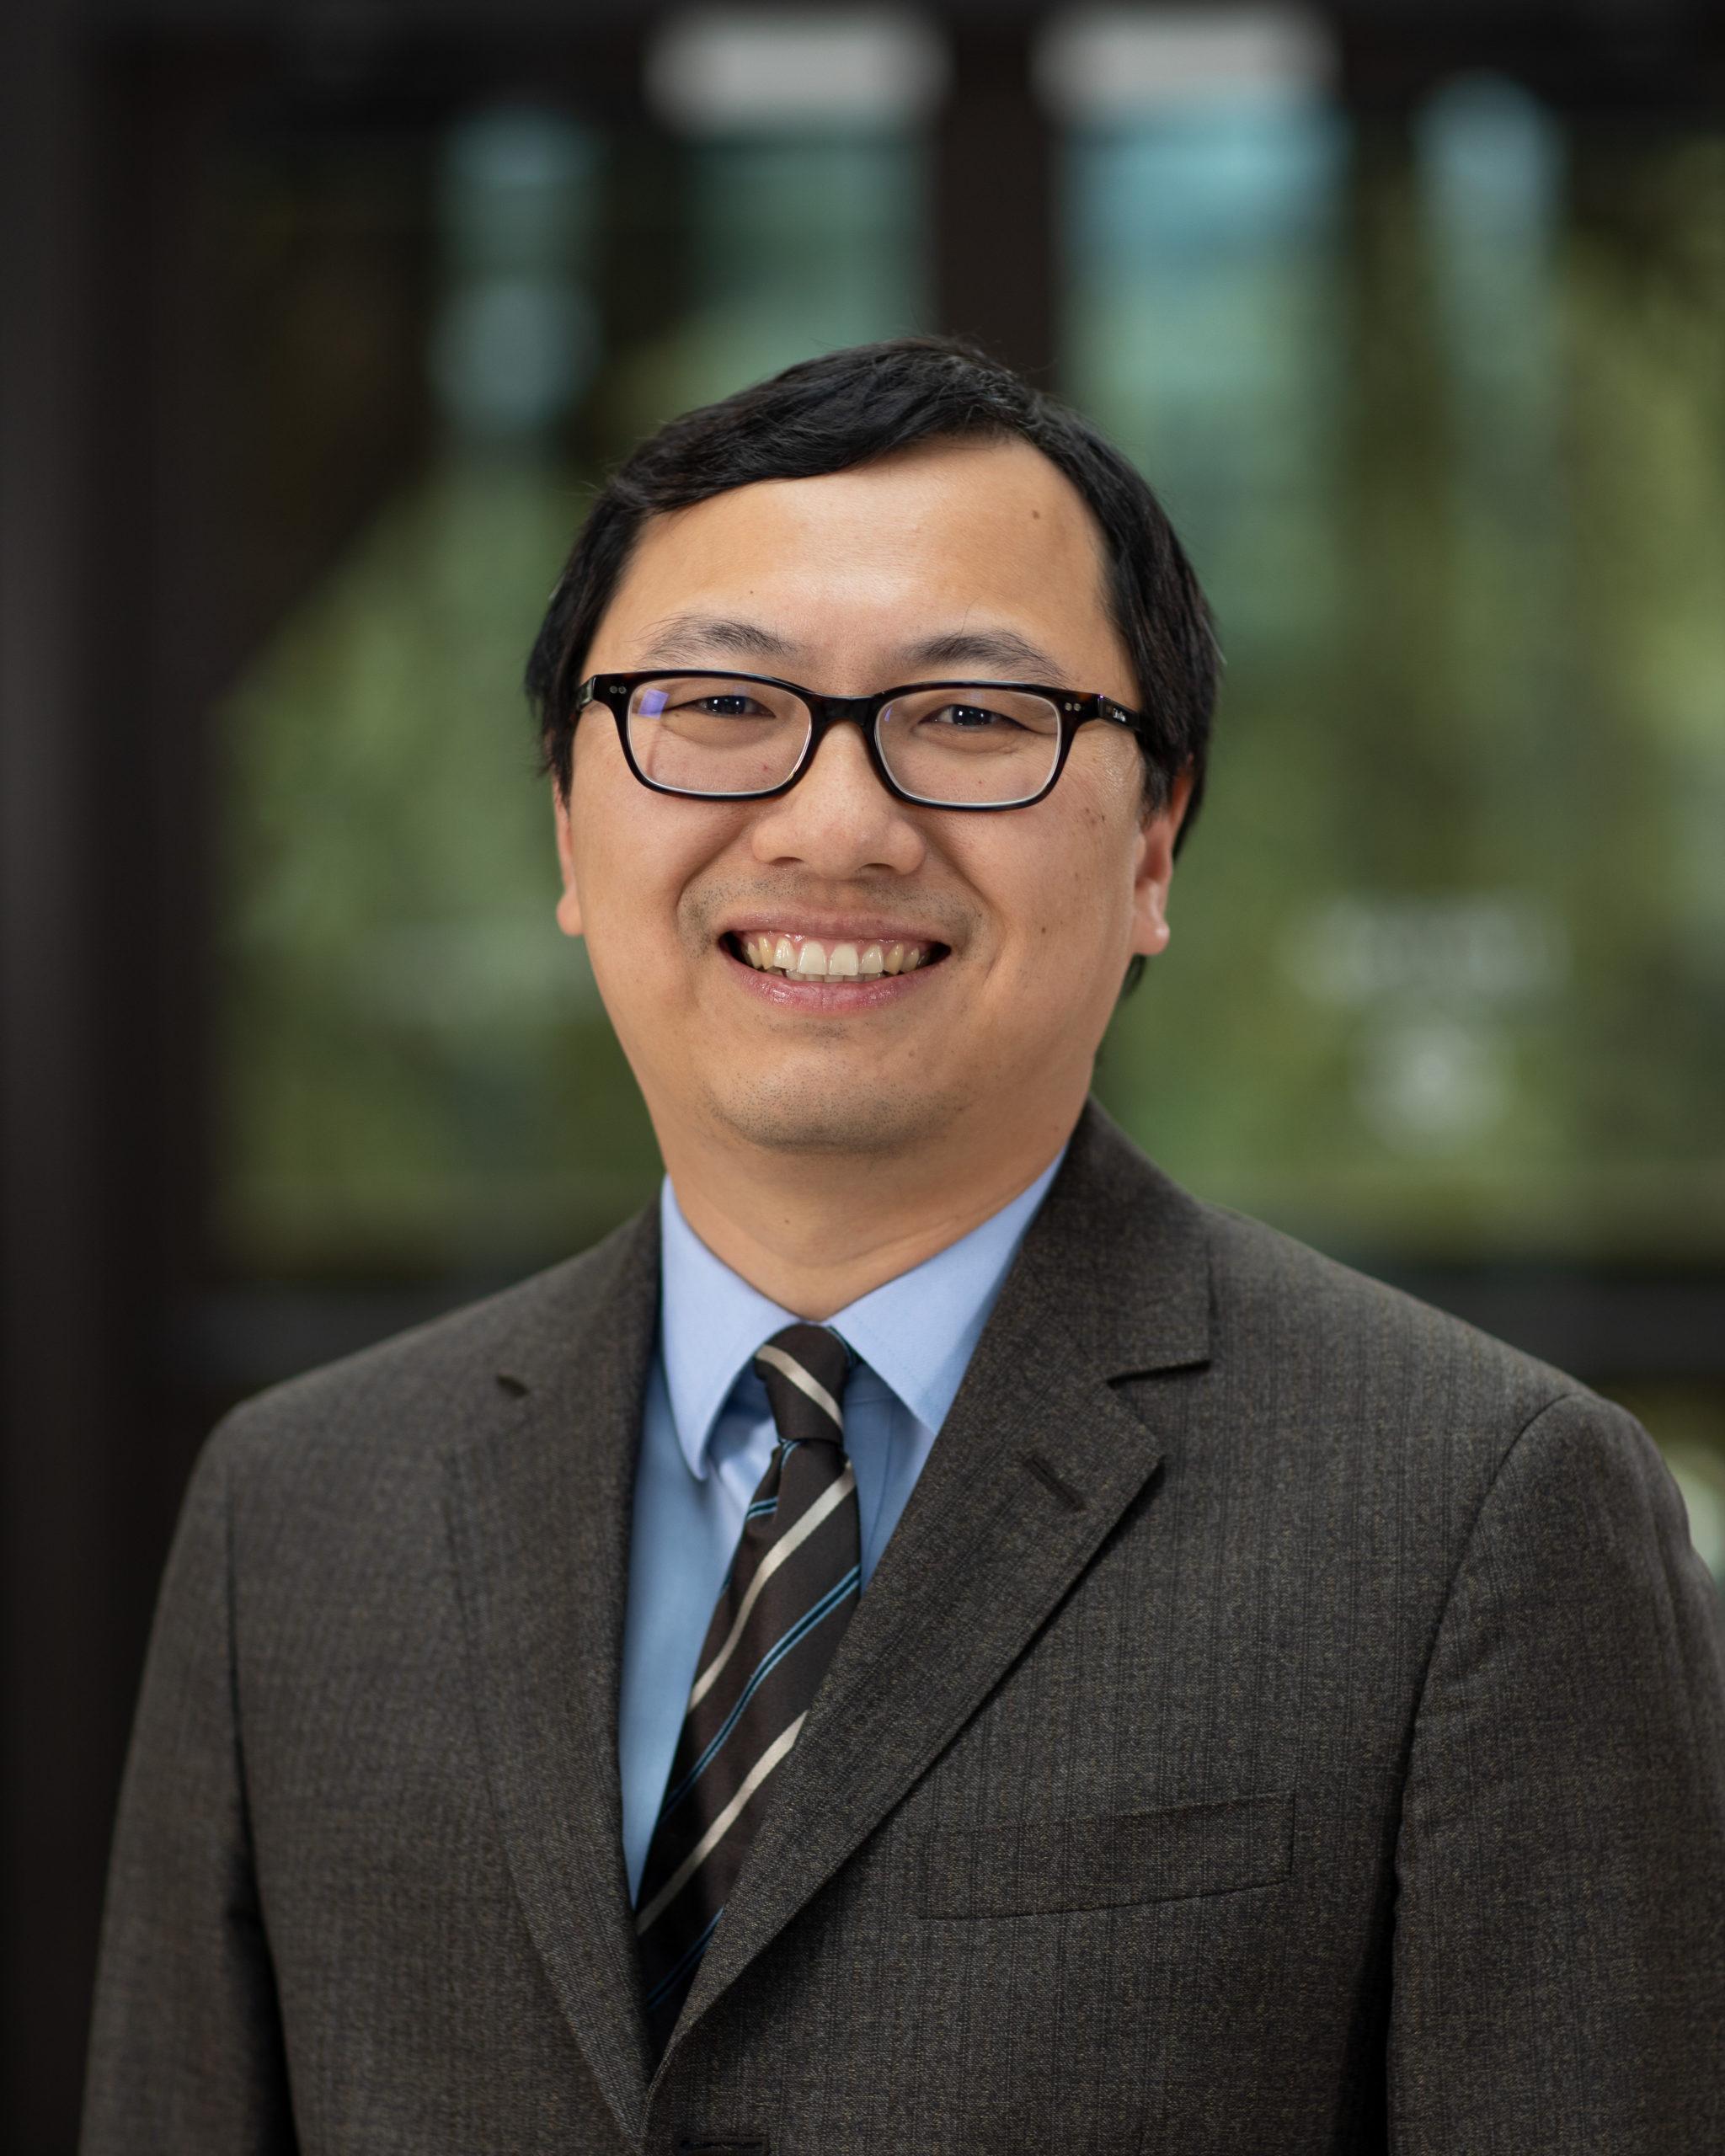 Portrait of Lei Zhang, wearing glasses and a blue shirt with a gray jacket and striped tie.